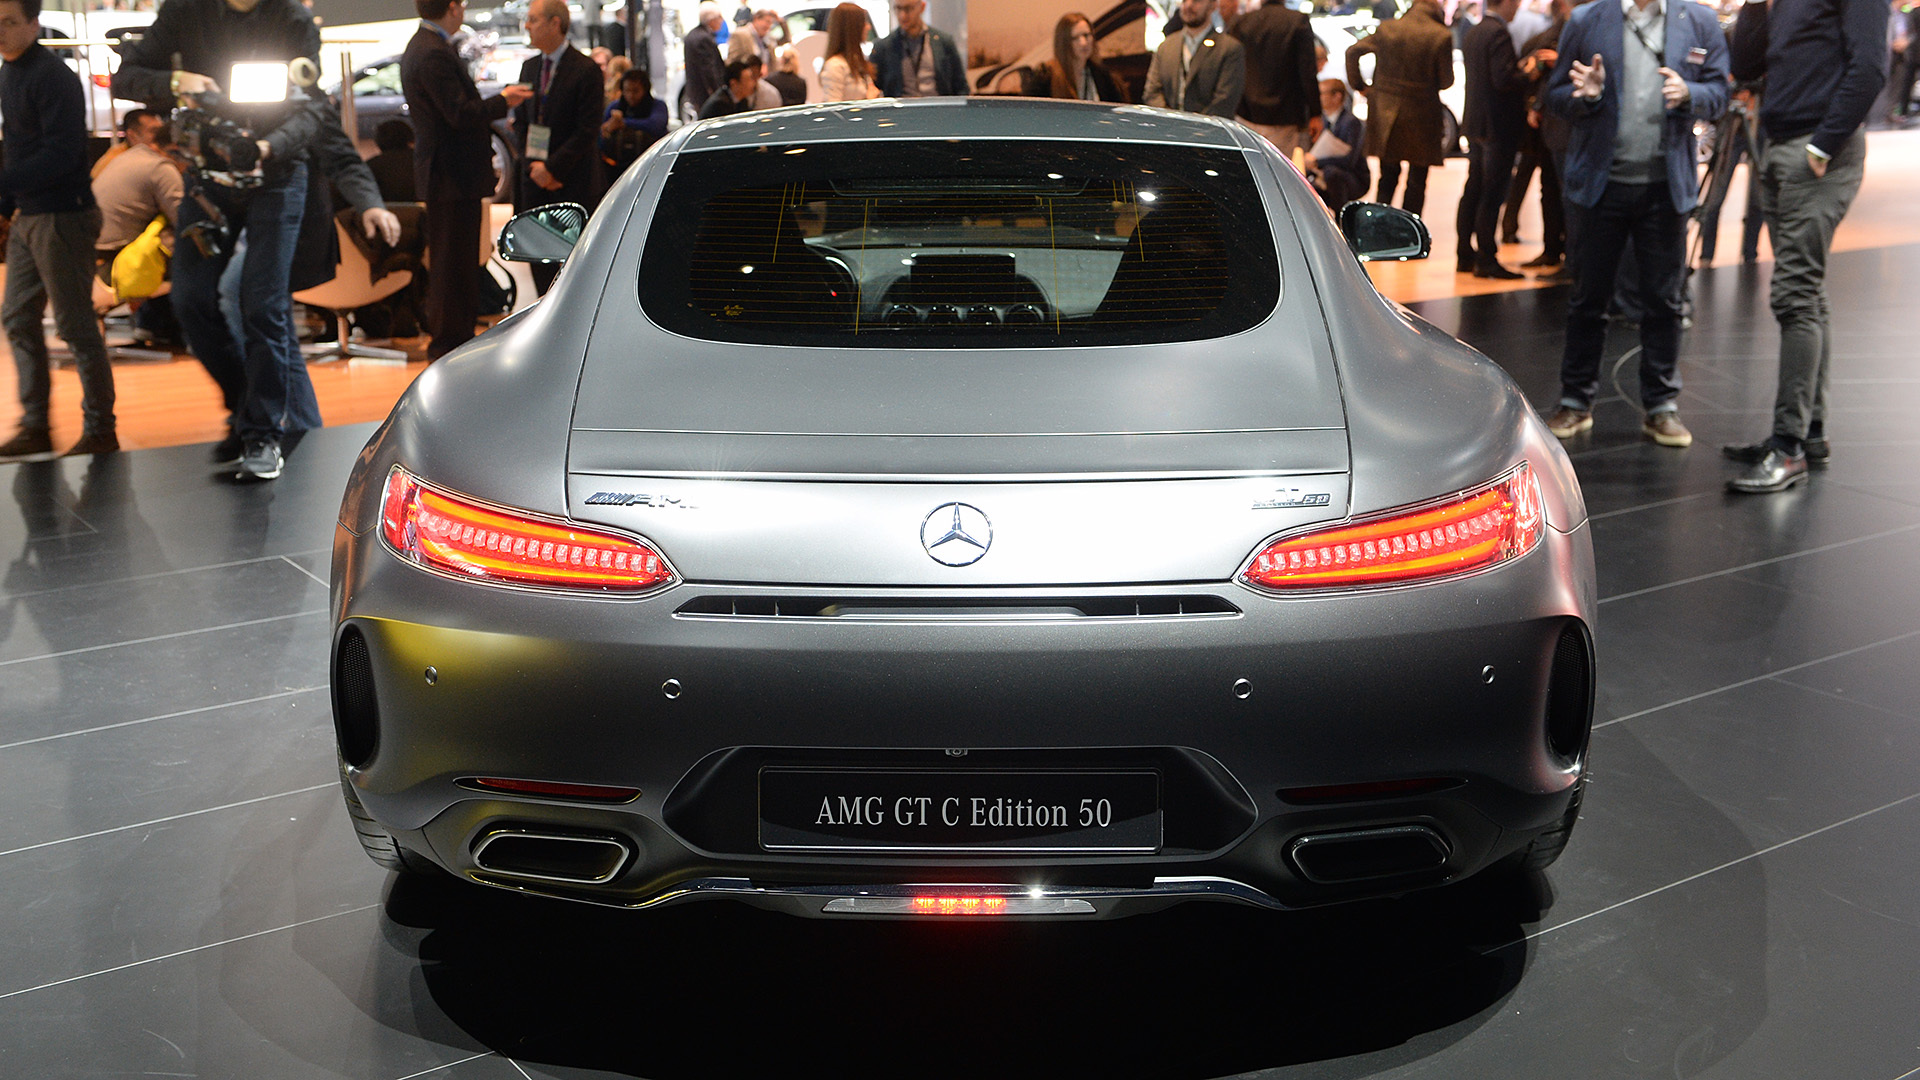 Mercedes-AMG GT C Coupe at rear